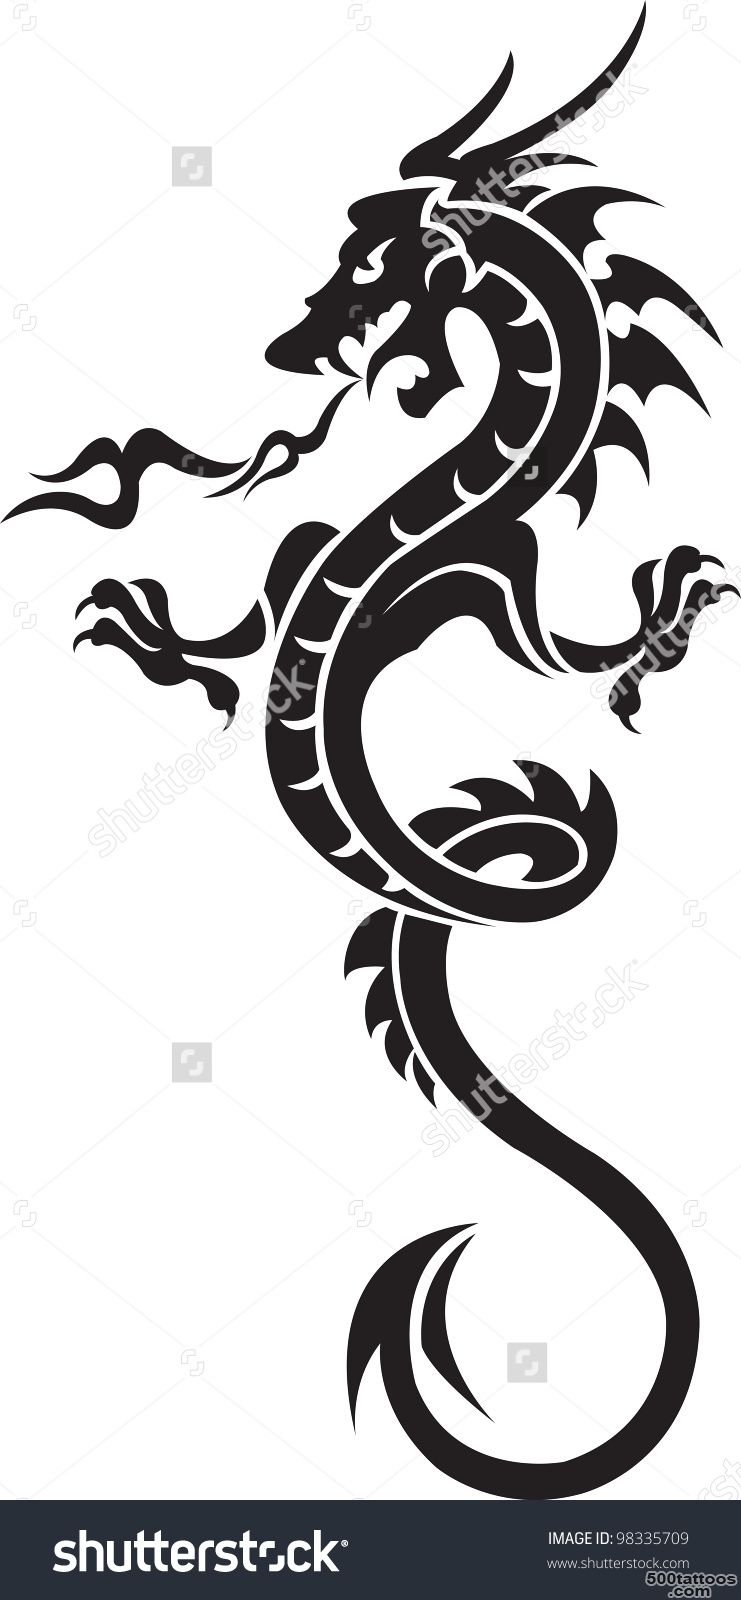 Dragon Tattoo Stock Photos, Images, amp Pictures  Shutterstock_20